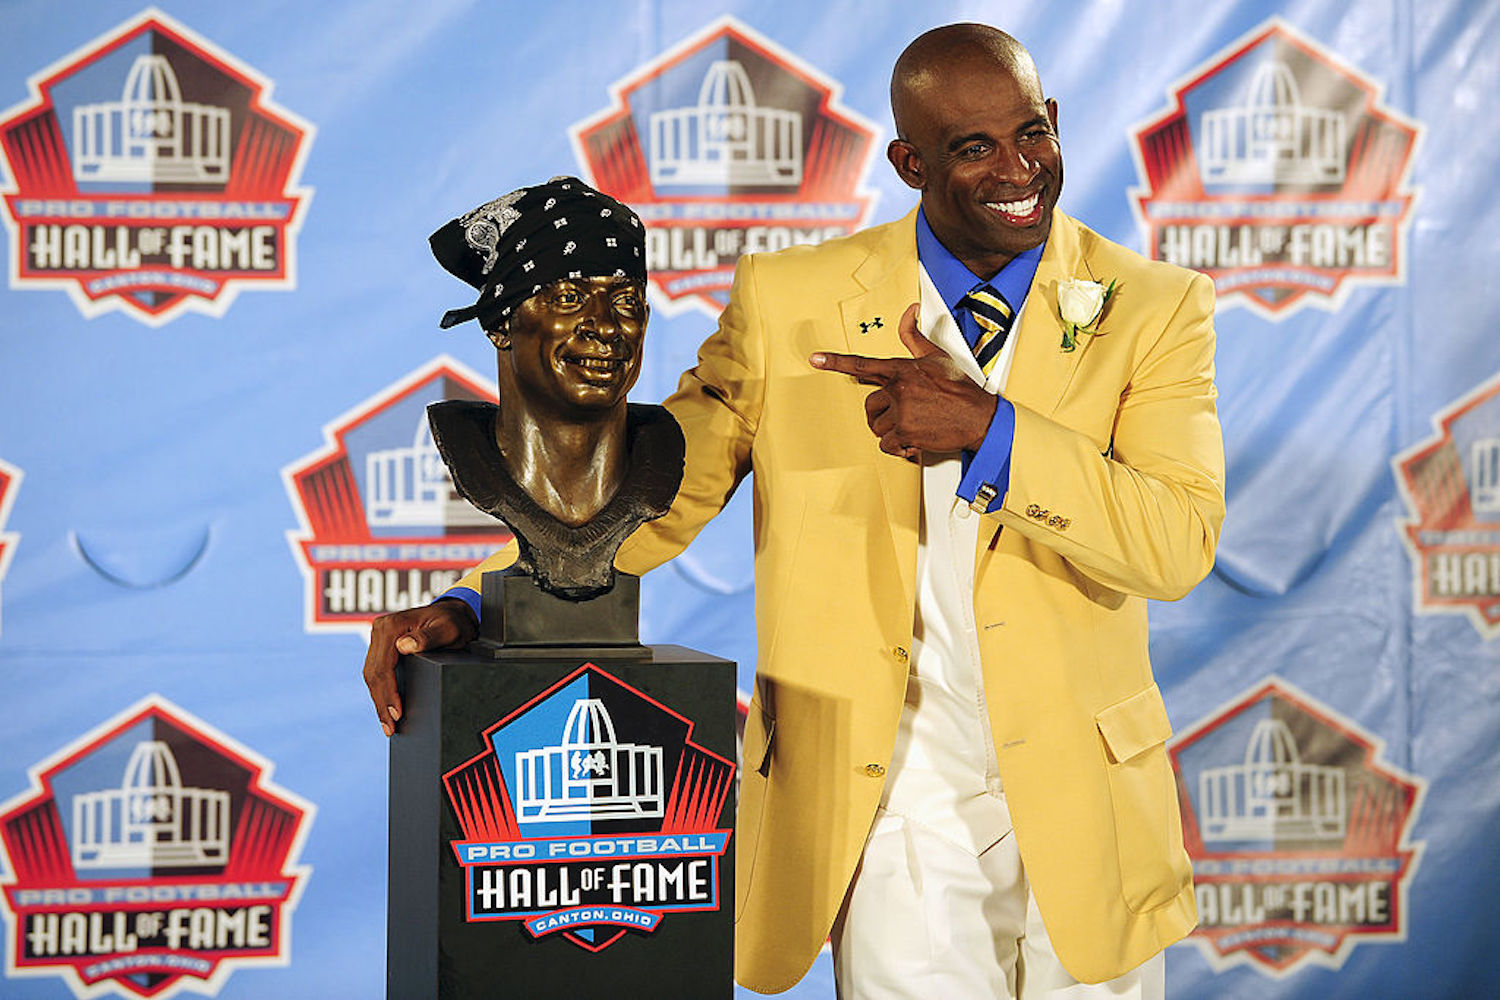 Deion Sanders was inducted into the Pro Football Hall of Fame in 2011, but he didn't recieve the news from anyone involved in the NFL.